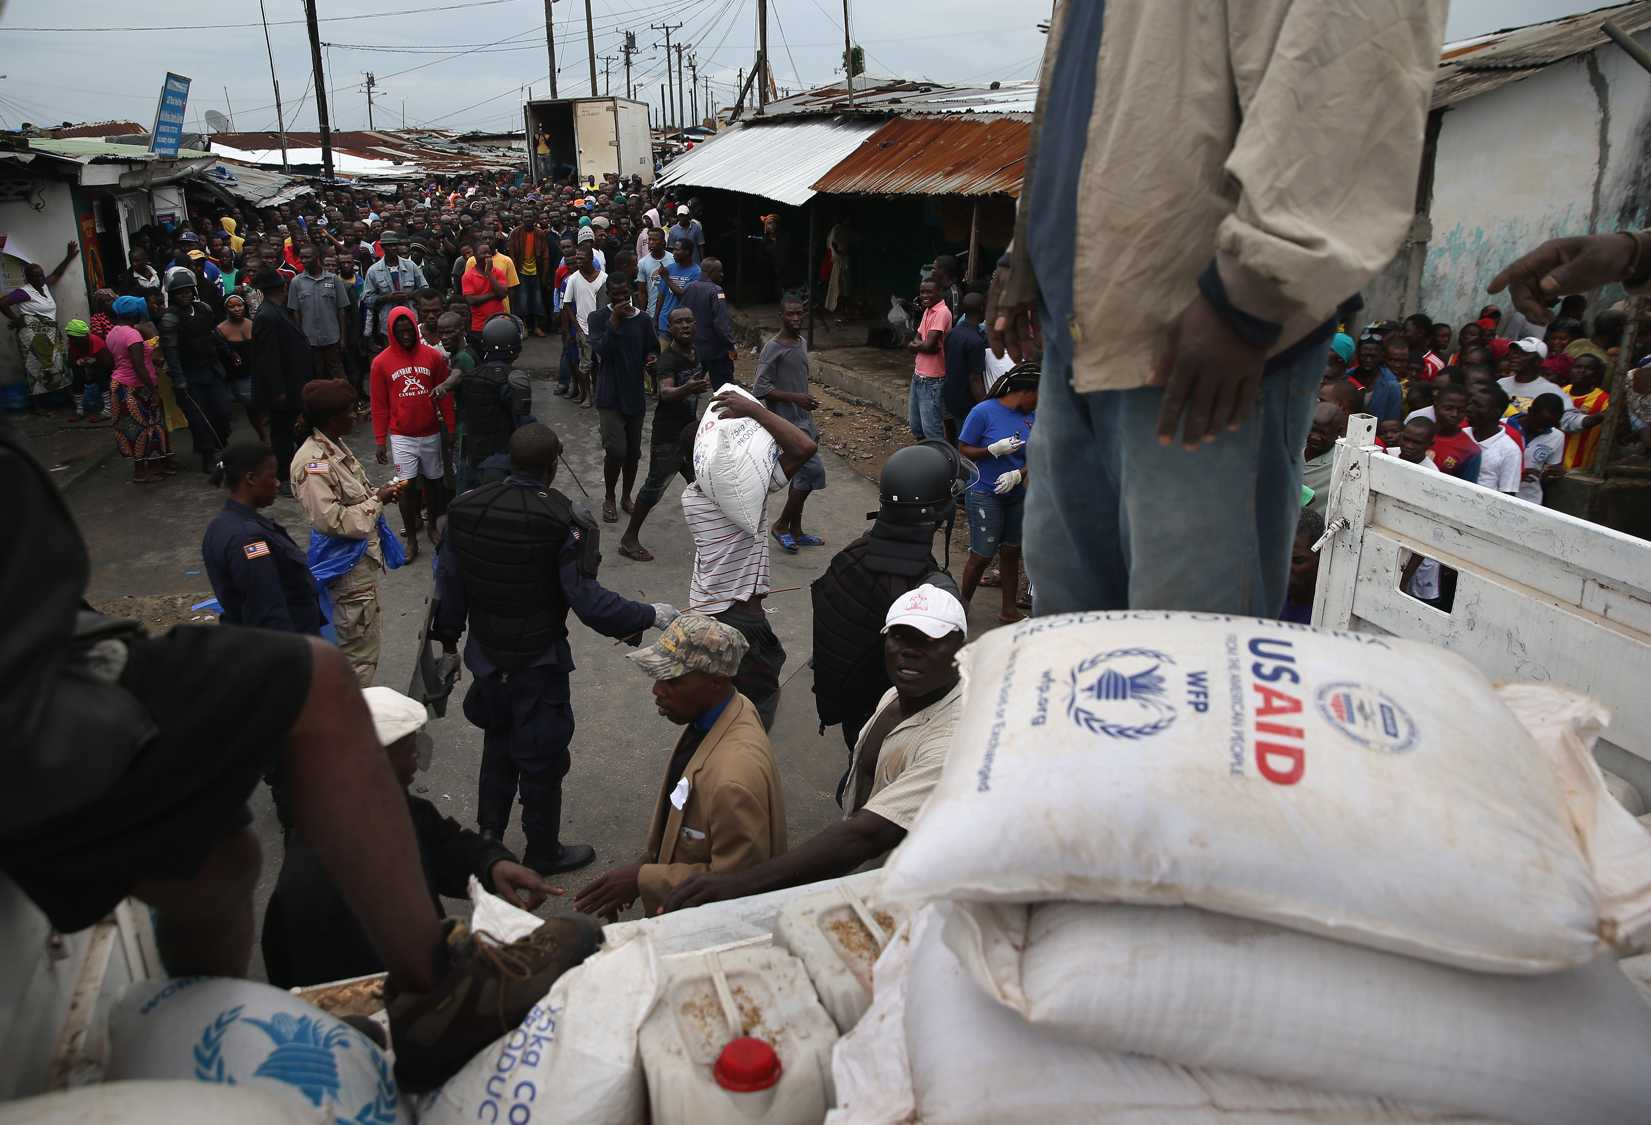 Residents of the West Point slum receive food aid during the second day of the government's Ebola quarantine on their neighborhood on August 21, 2014 in Monrovia, Liberia. (John Moore—Getty)